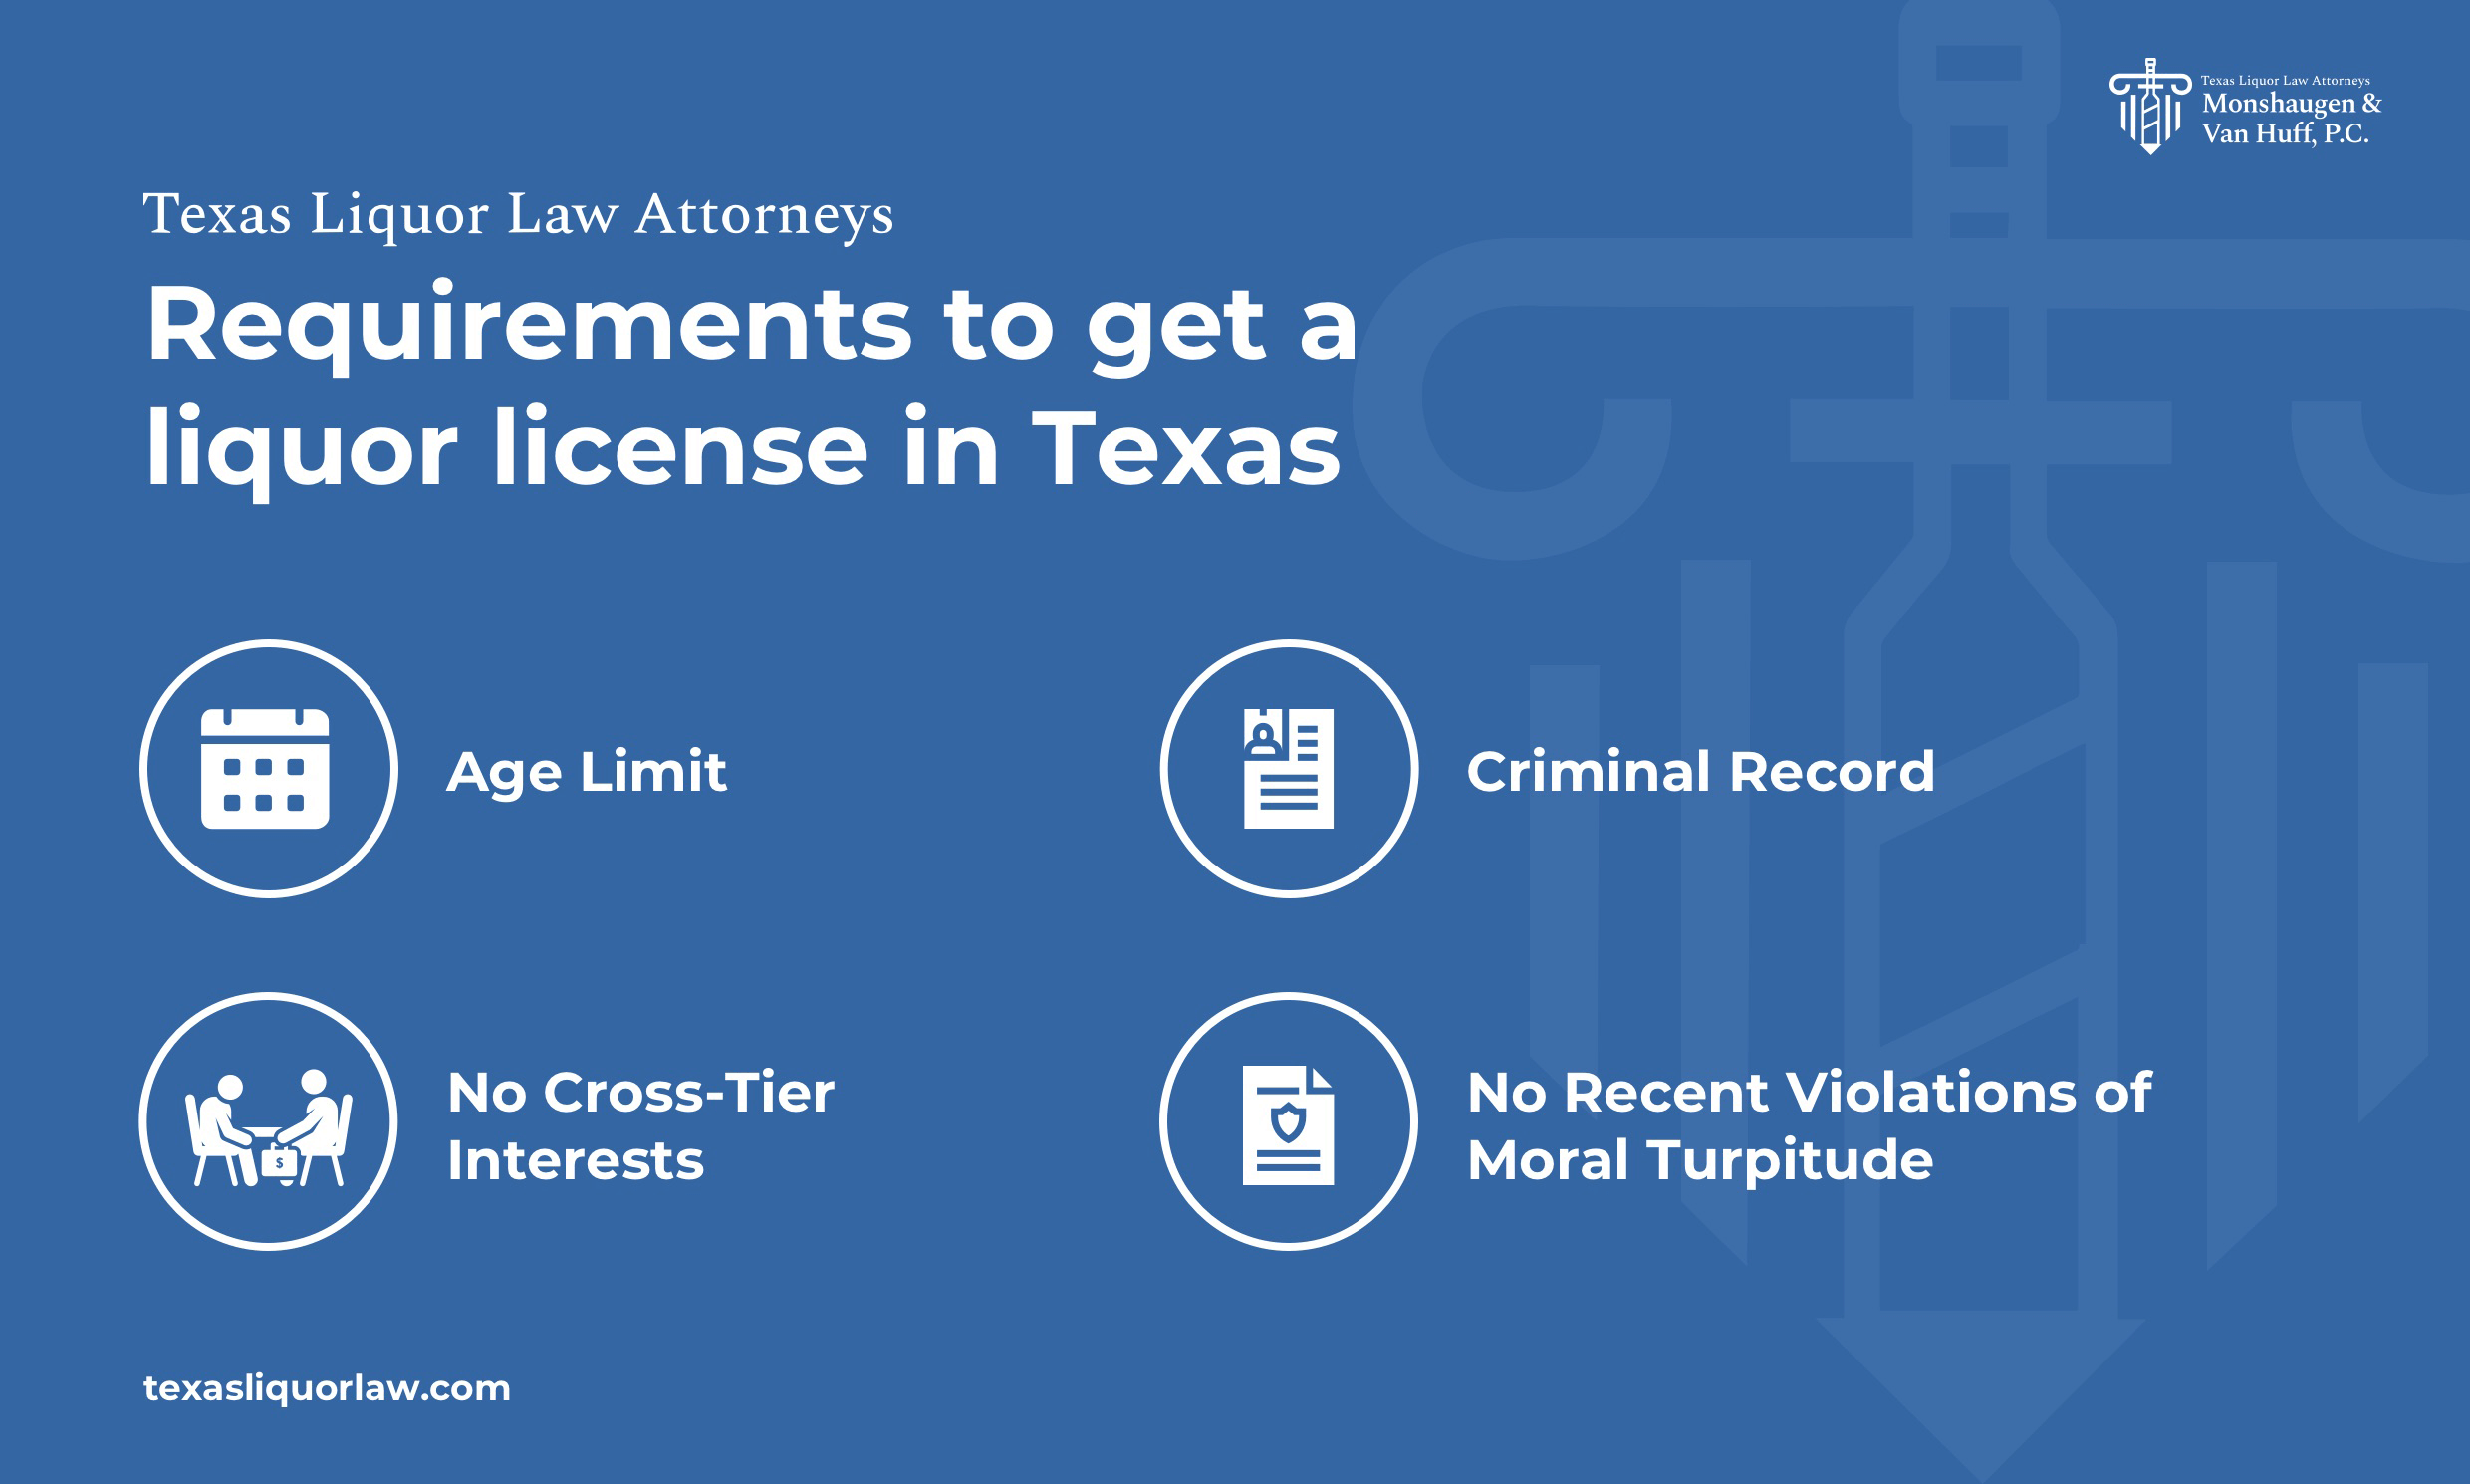 Requirements to get a liquor license in Texas - TABC